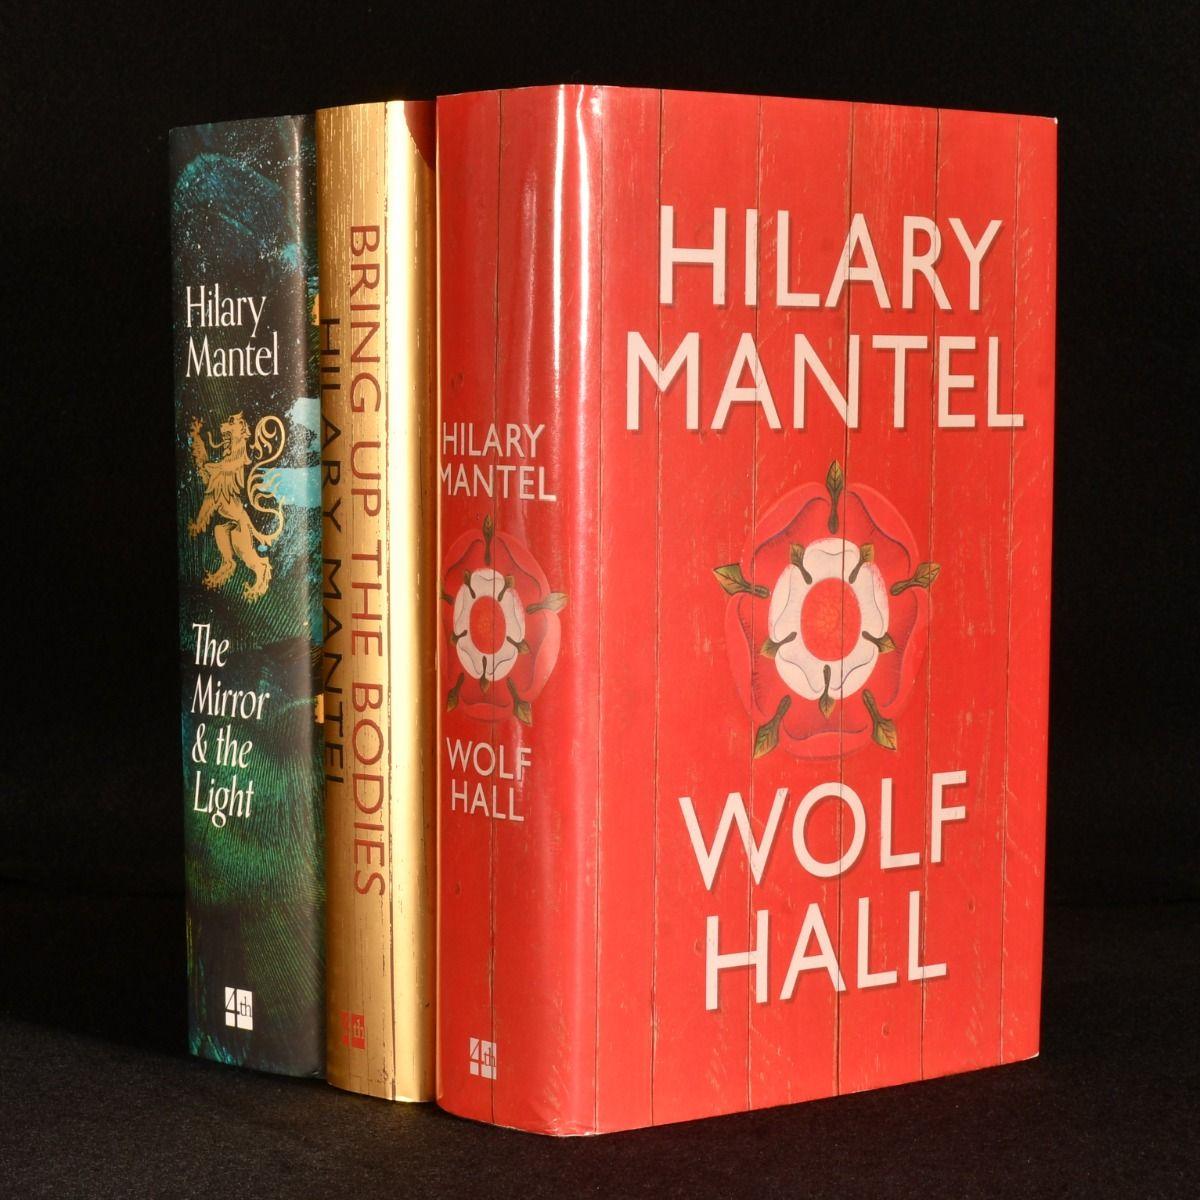 A striking signed first impression set of Hilary Mantel's magnum opus, a trilogy following the rise and fall of Thomas Cromwell.

All three of the volumes are first editions, first impressions.

Each of the three novels are signed by Mantel, 'Wolf